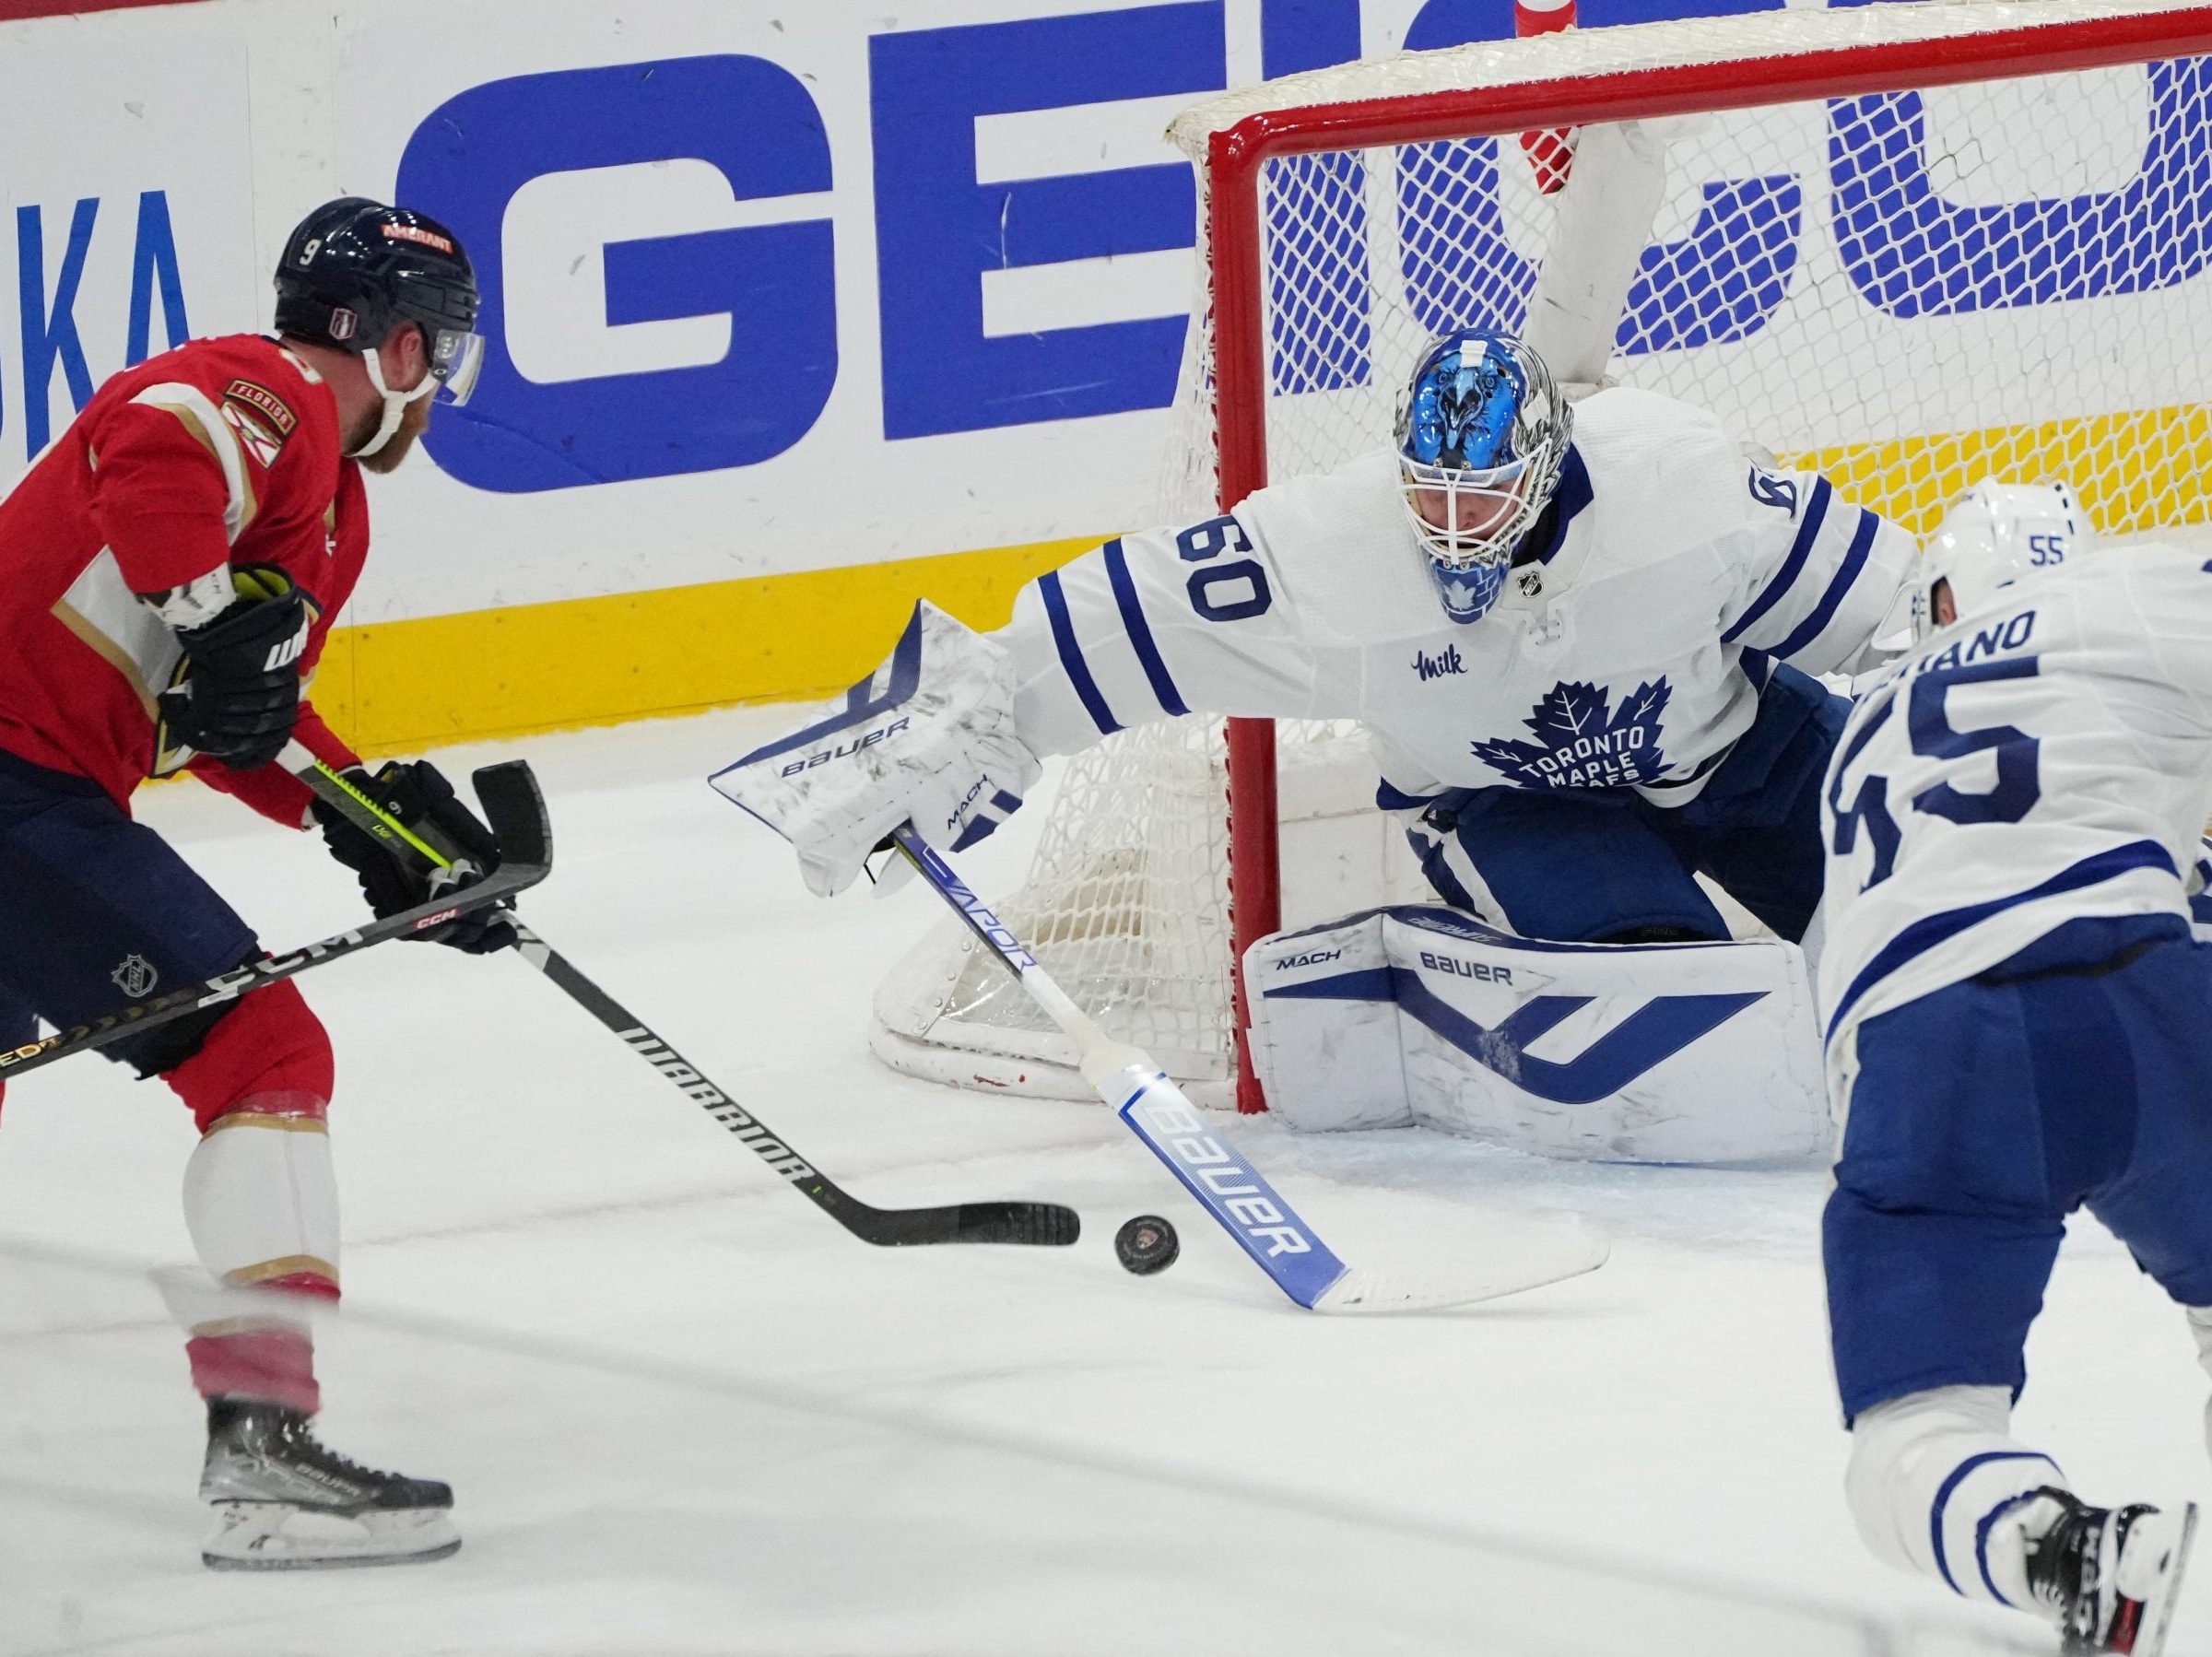 NHL: Maple Leafs haven't sold out a home game yet this season